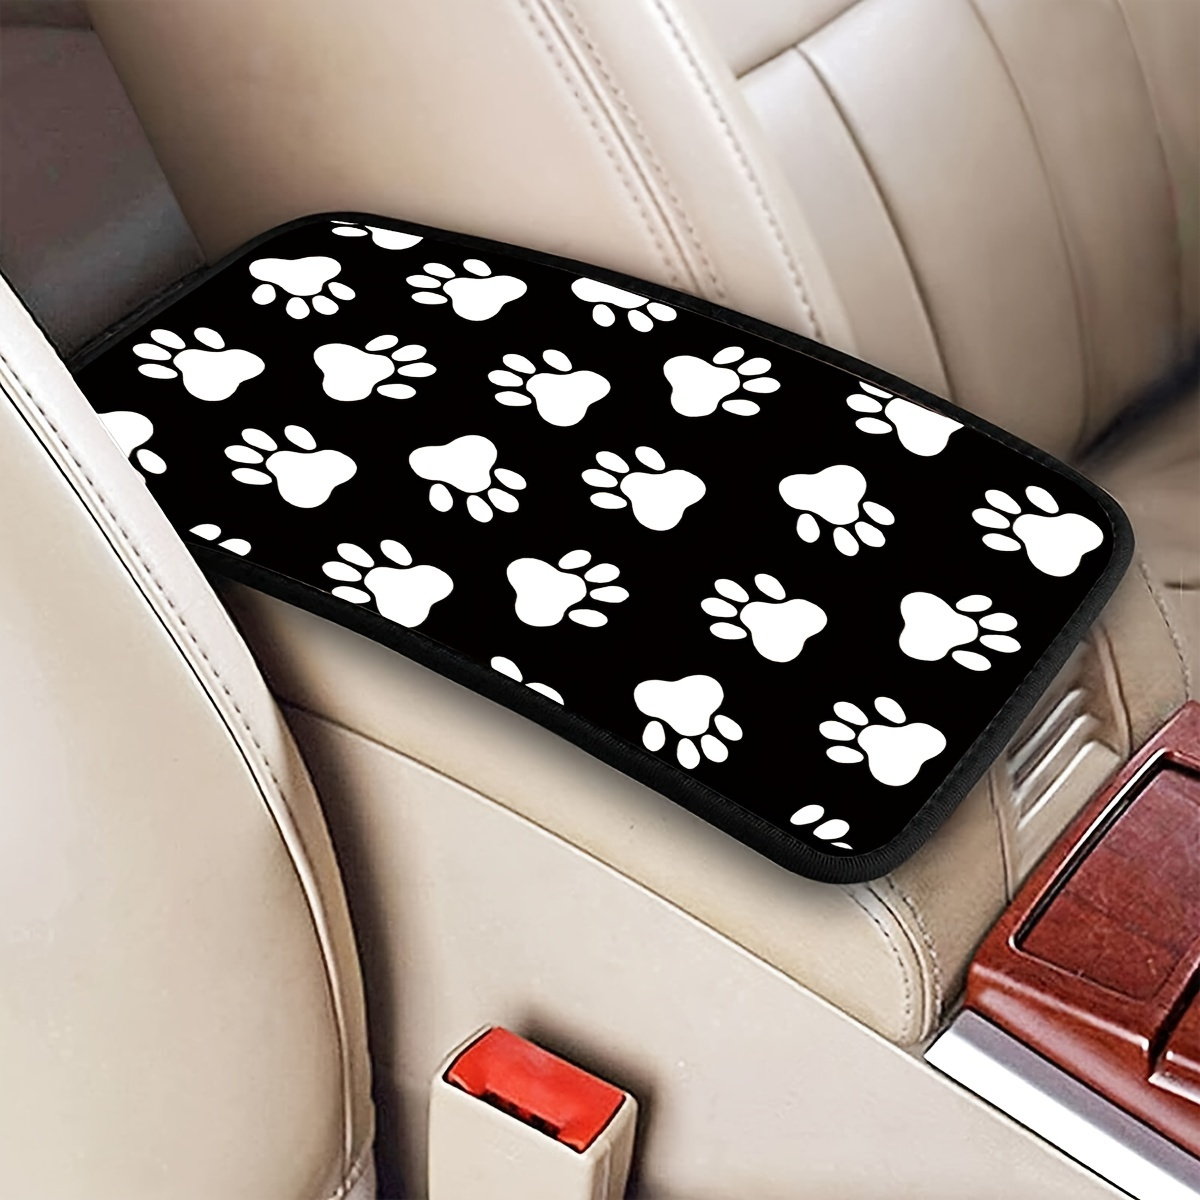 

1pc Black White Dog Paw Print Armrest Box Pad, Auto Center Console Armrest Protector Cover For Car Suv Decoration Accessories